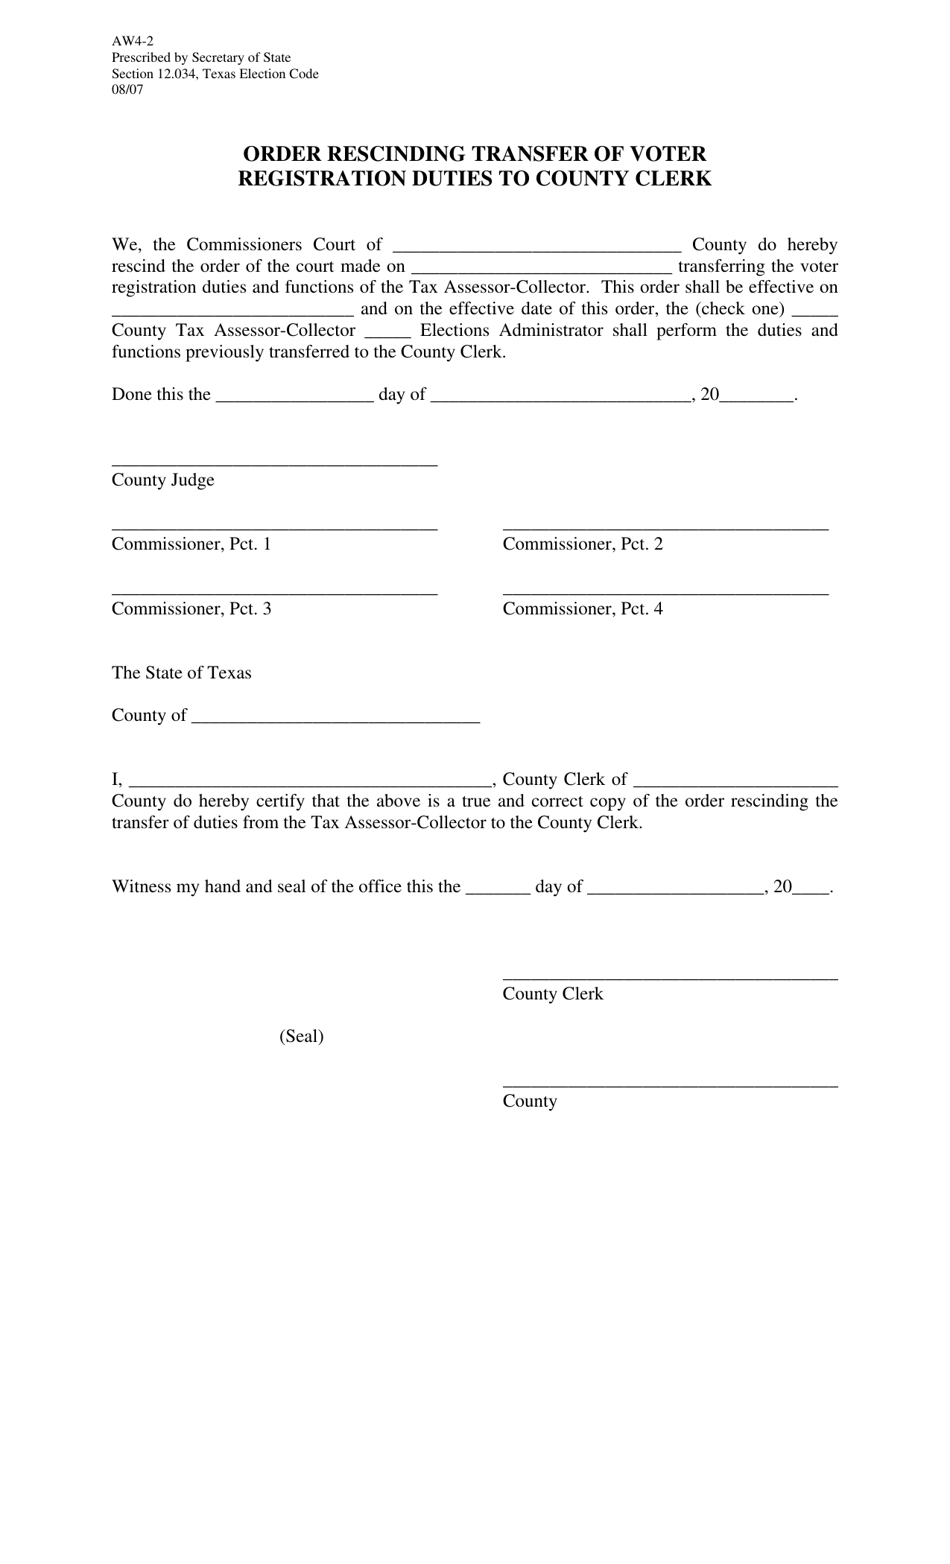 Form AW4-2 Order Rescinding Transfer of Voter Registration Duties to County Clerk - Texas, Page 1